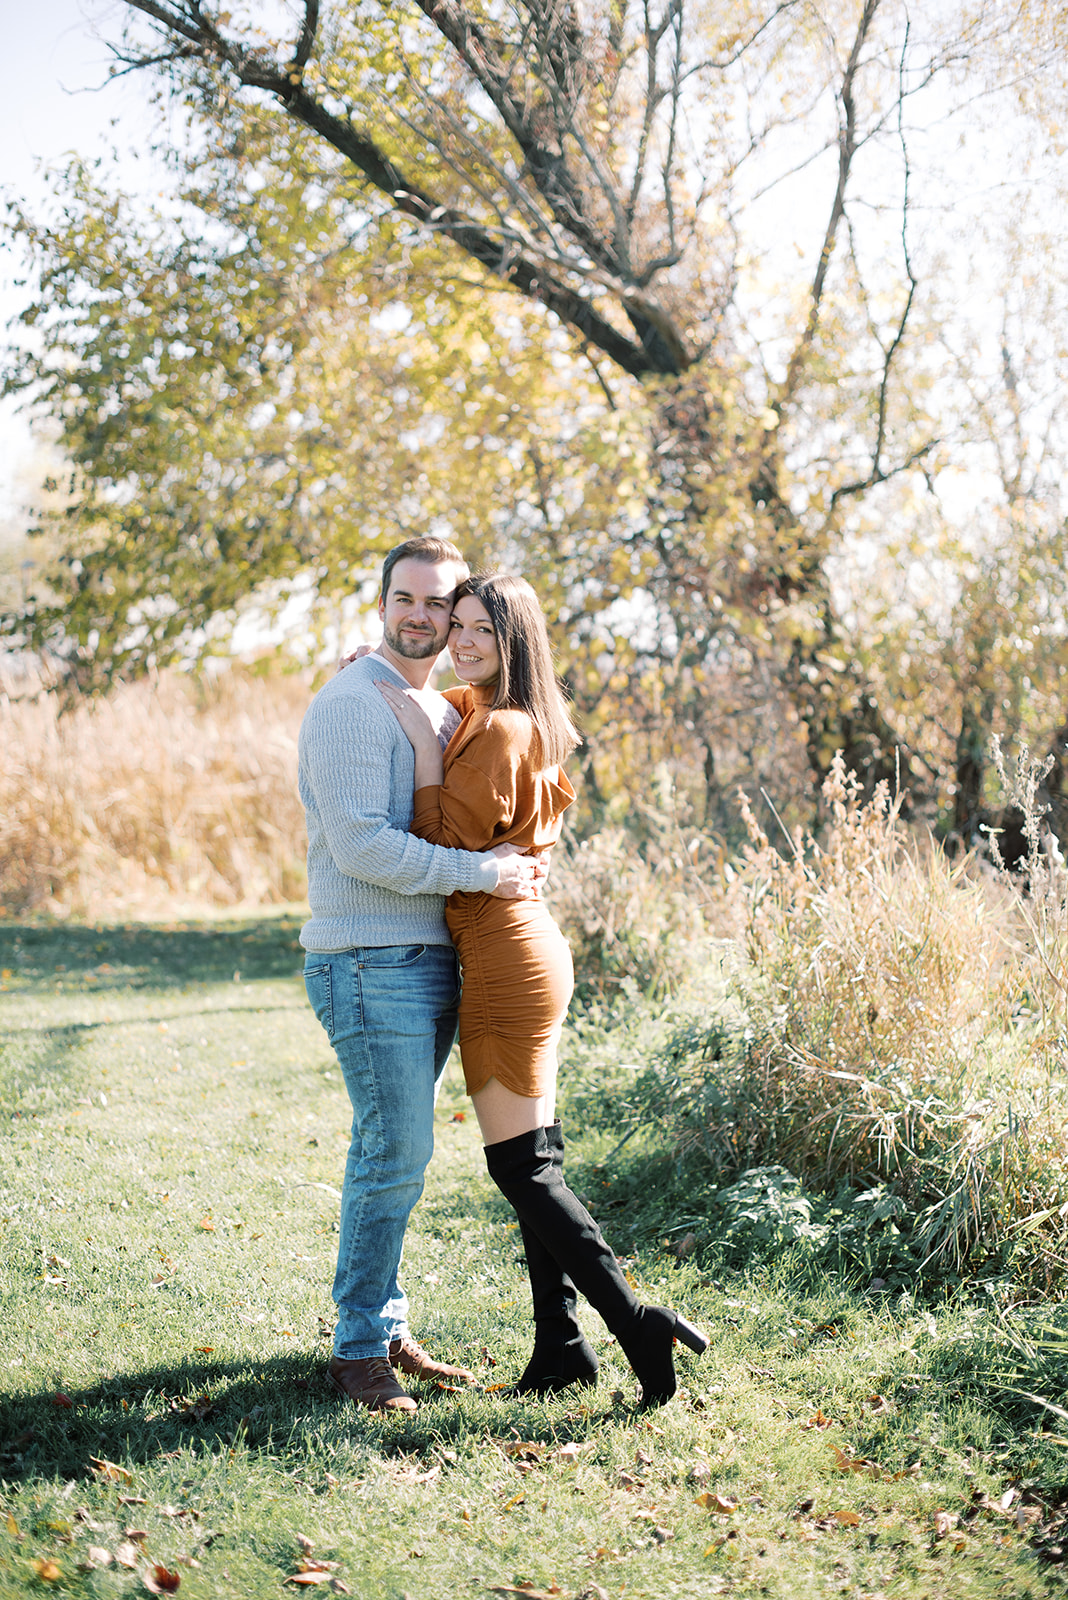 Picnic Point Engagement Session Madison Wisconsin Meghan Lee Harris Photography Ideas Inspiration Trail Nature Fall Wedd